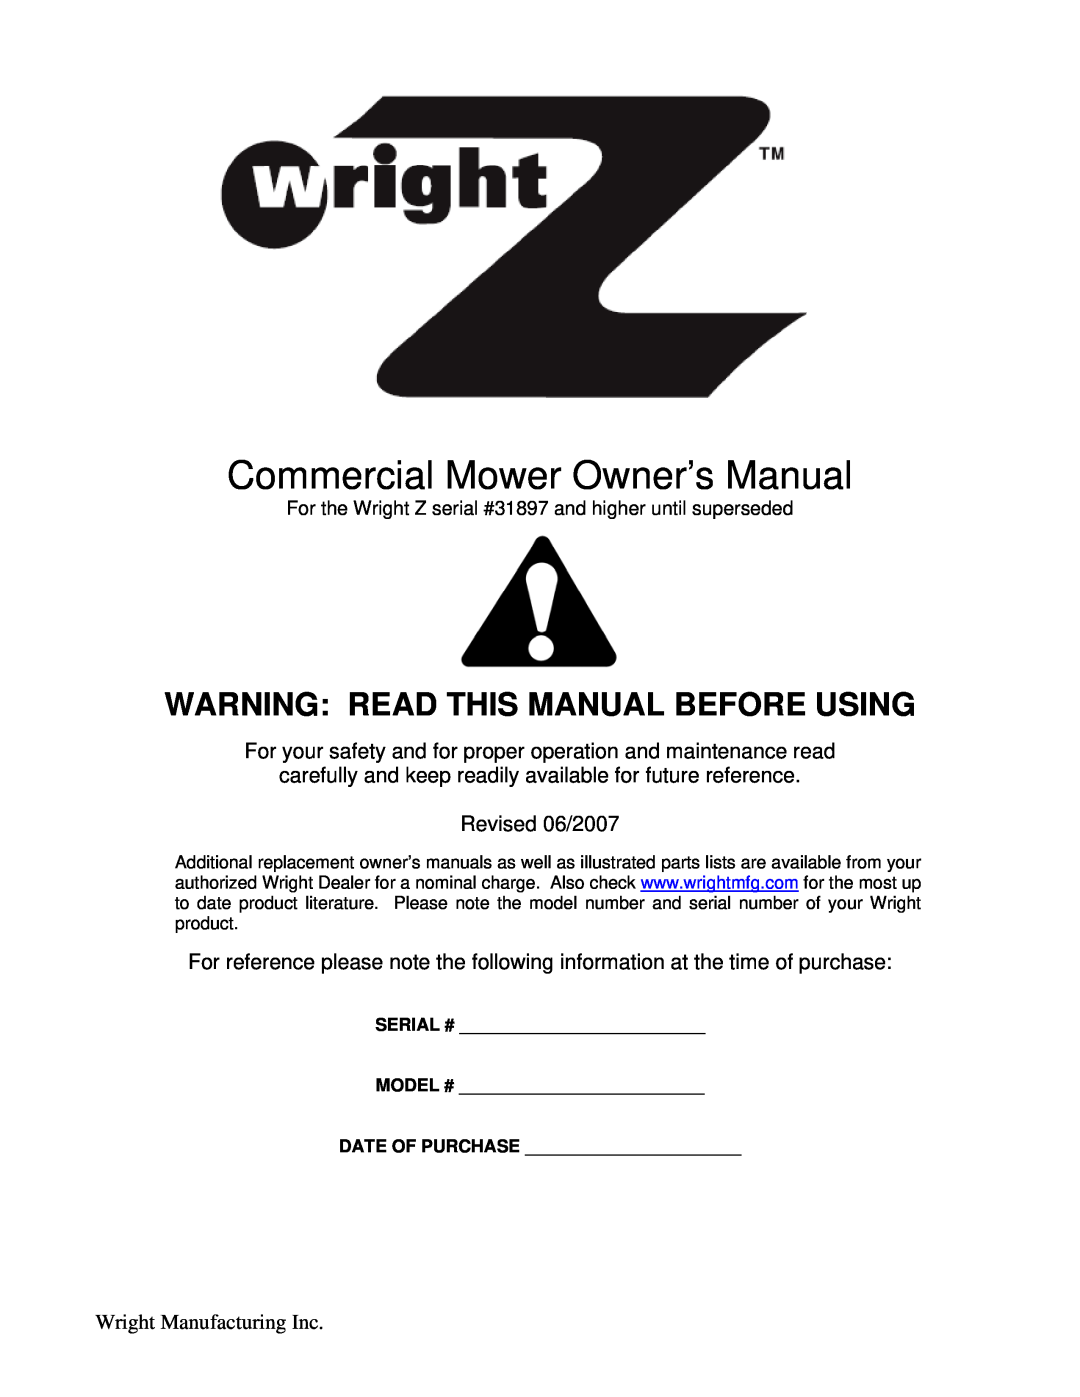 Wright Manufacturing 31897 owner manual Warning Read This Manual Before Using 